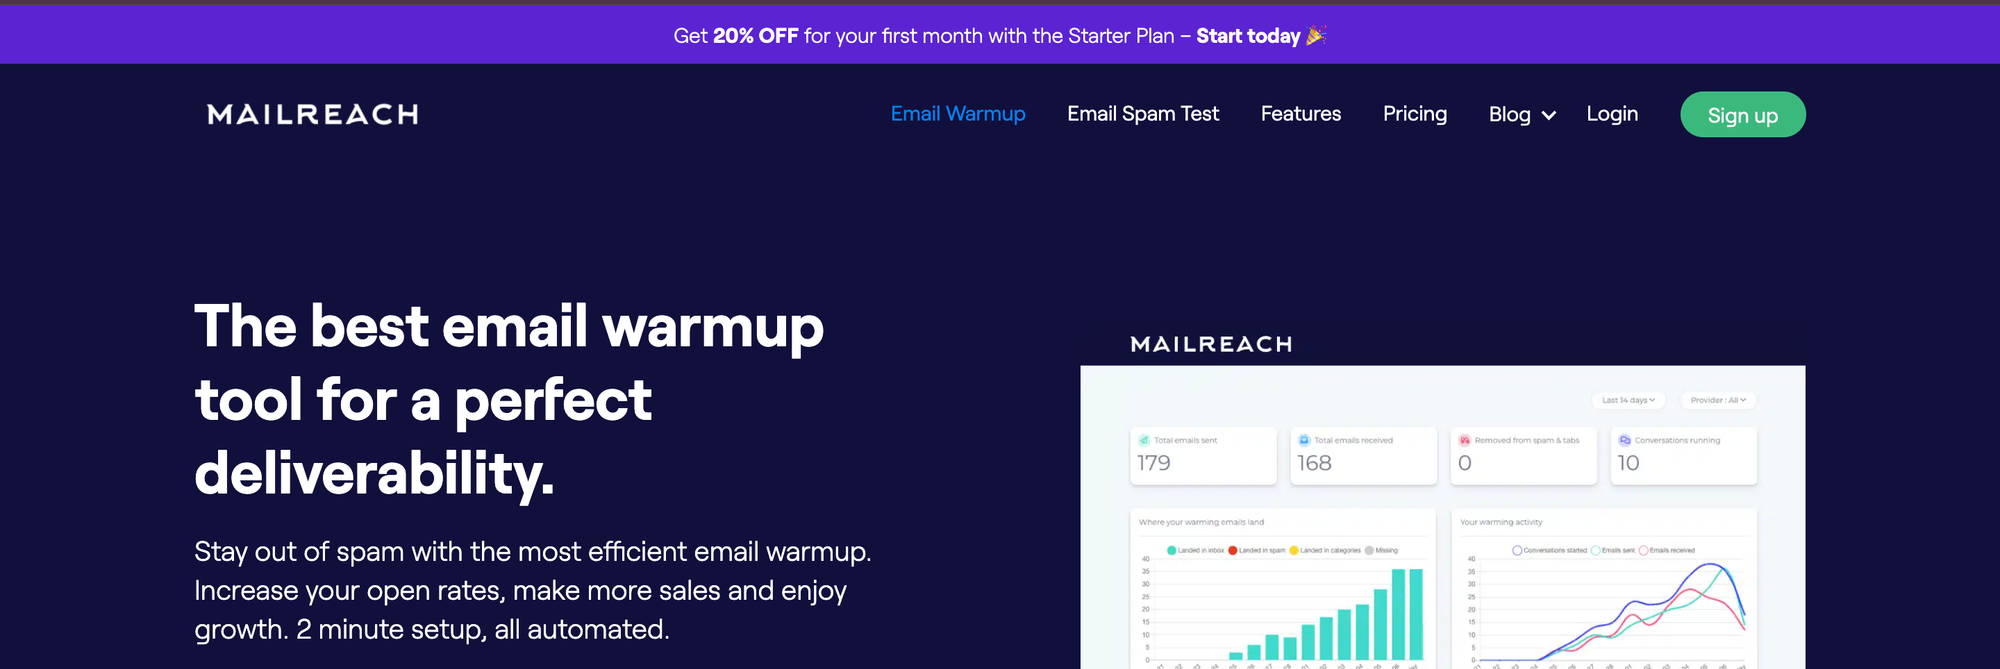 Mailreach - Email Warmup Tool